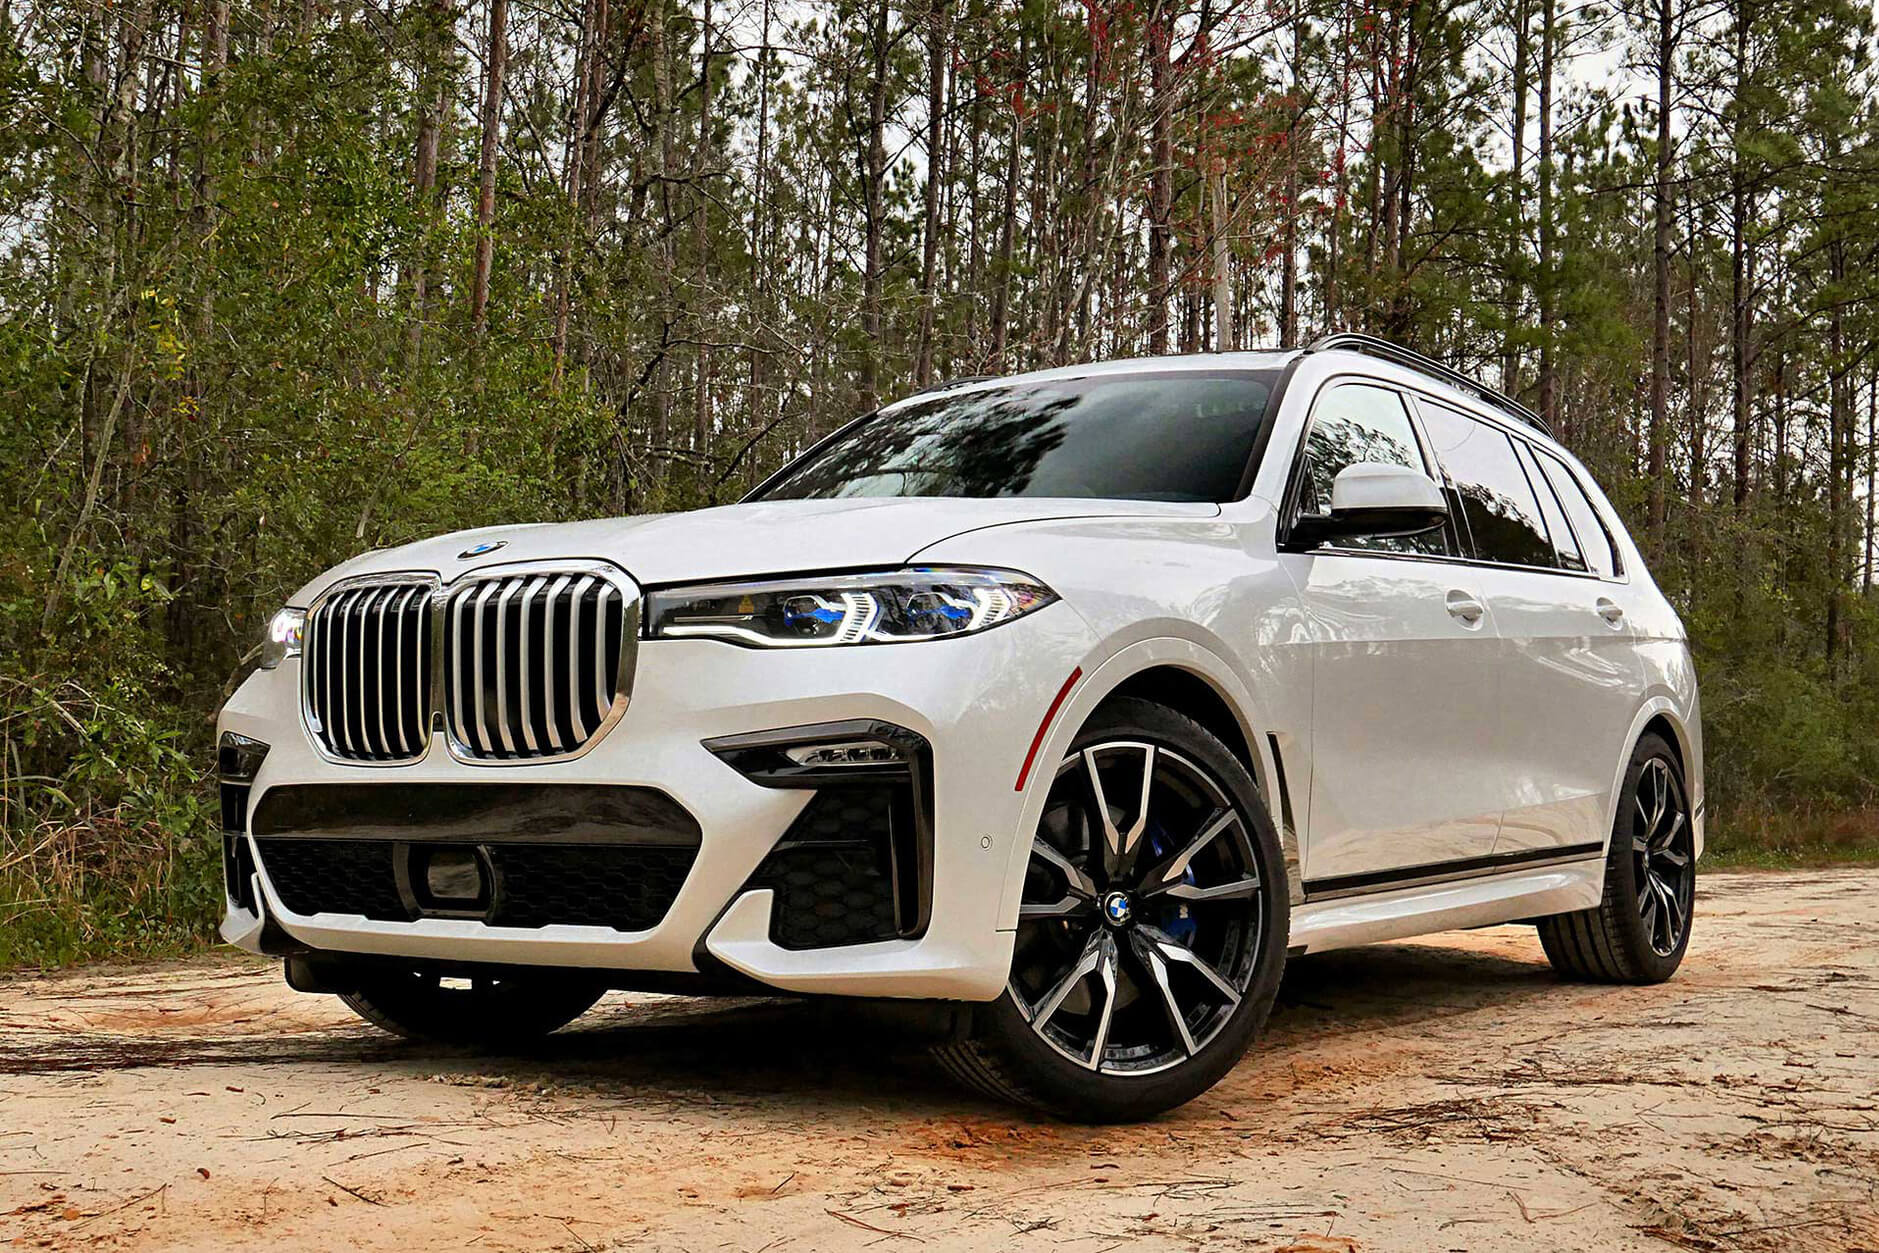 BMW X7 M SPORT 2020 DISTRIBUTED BY THACO IS PRICED AT MORE THAN 5.8